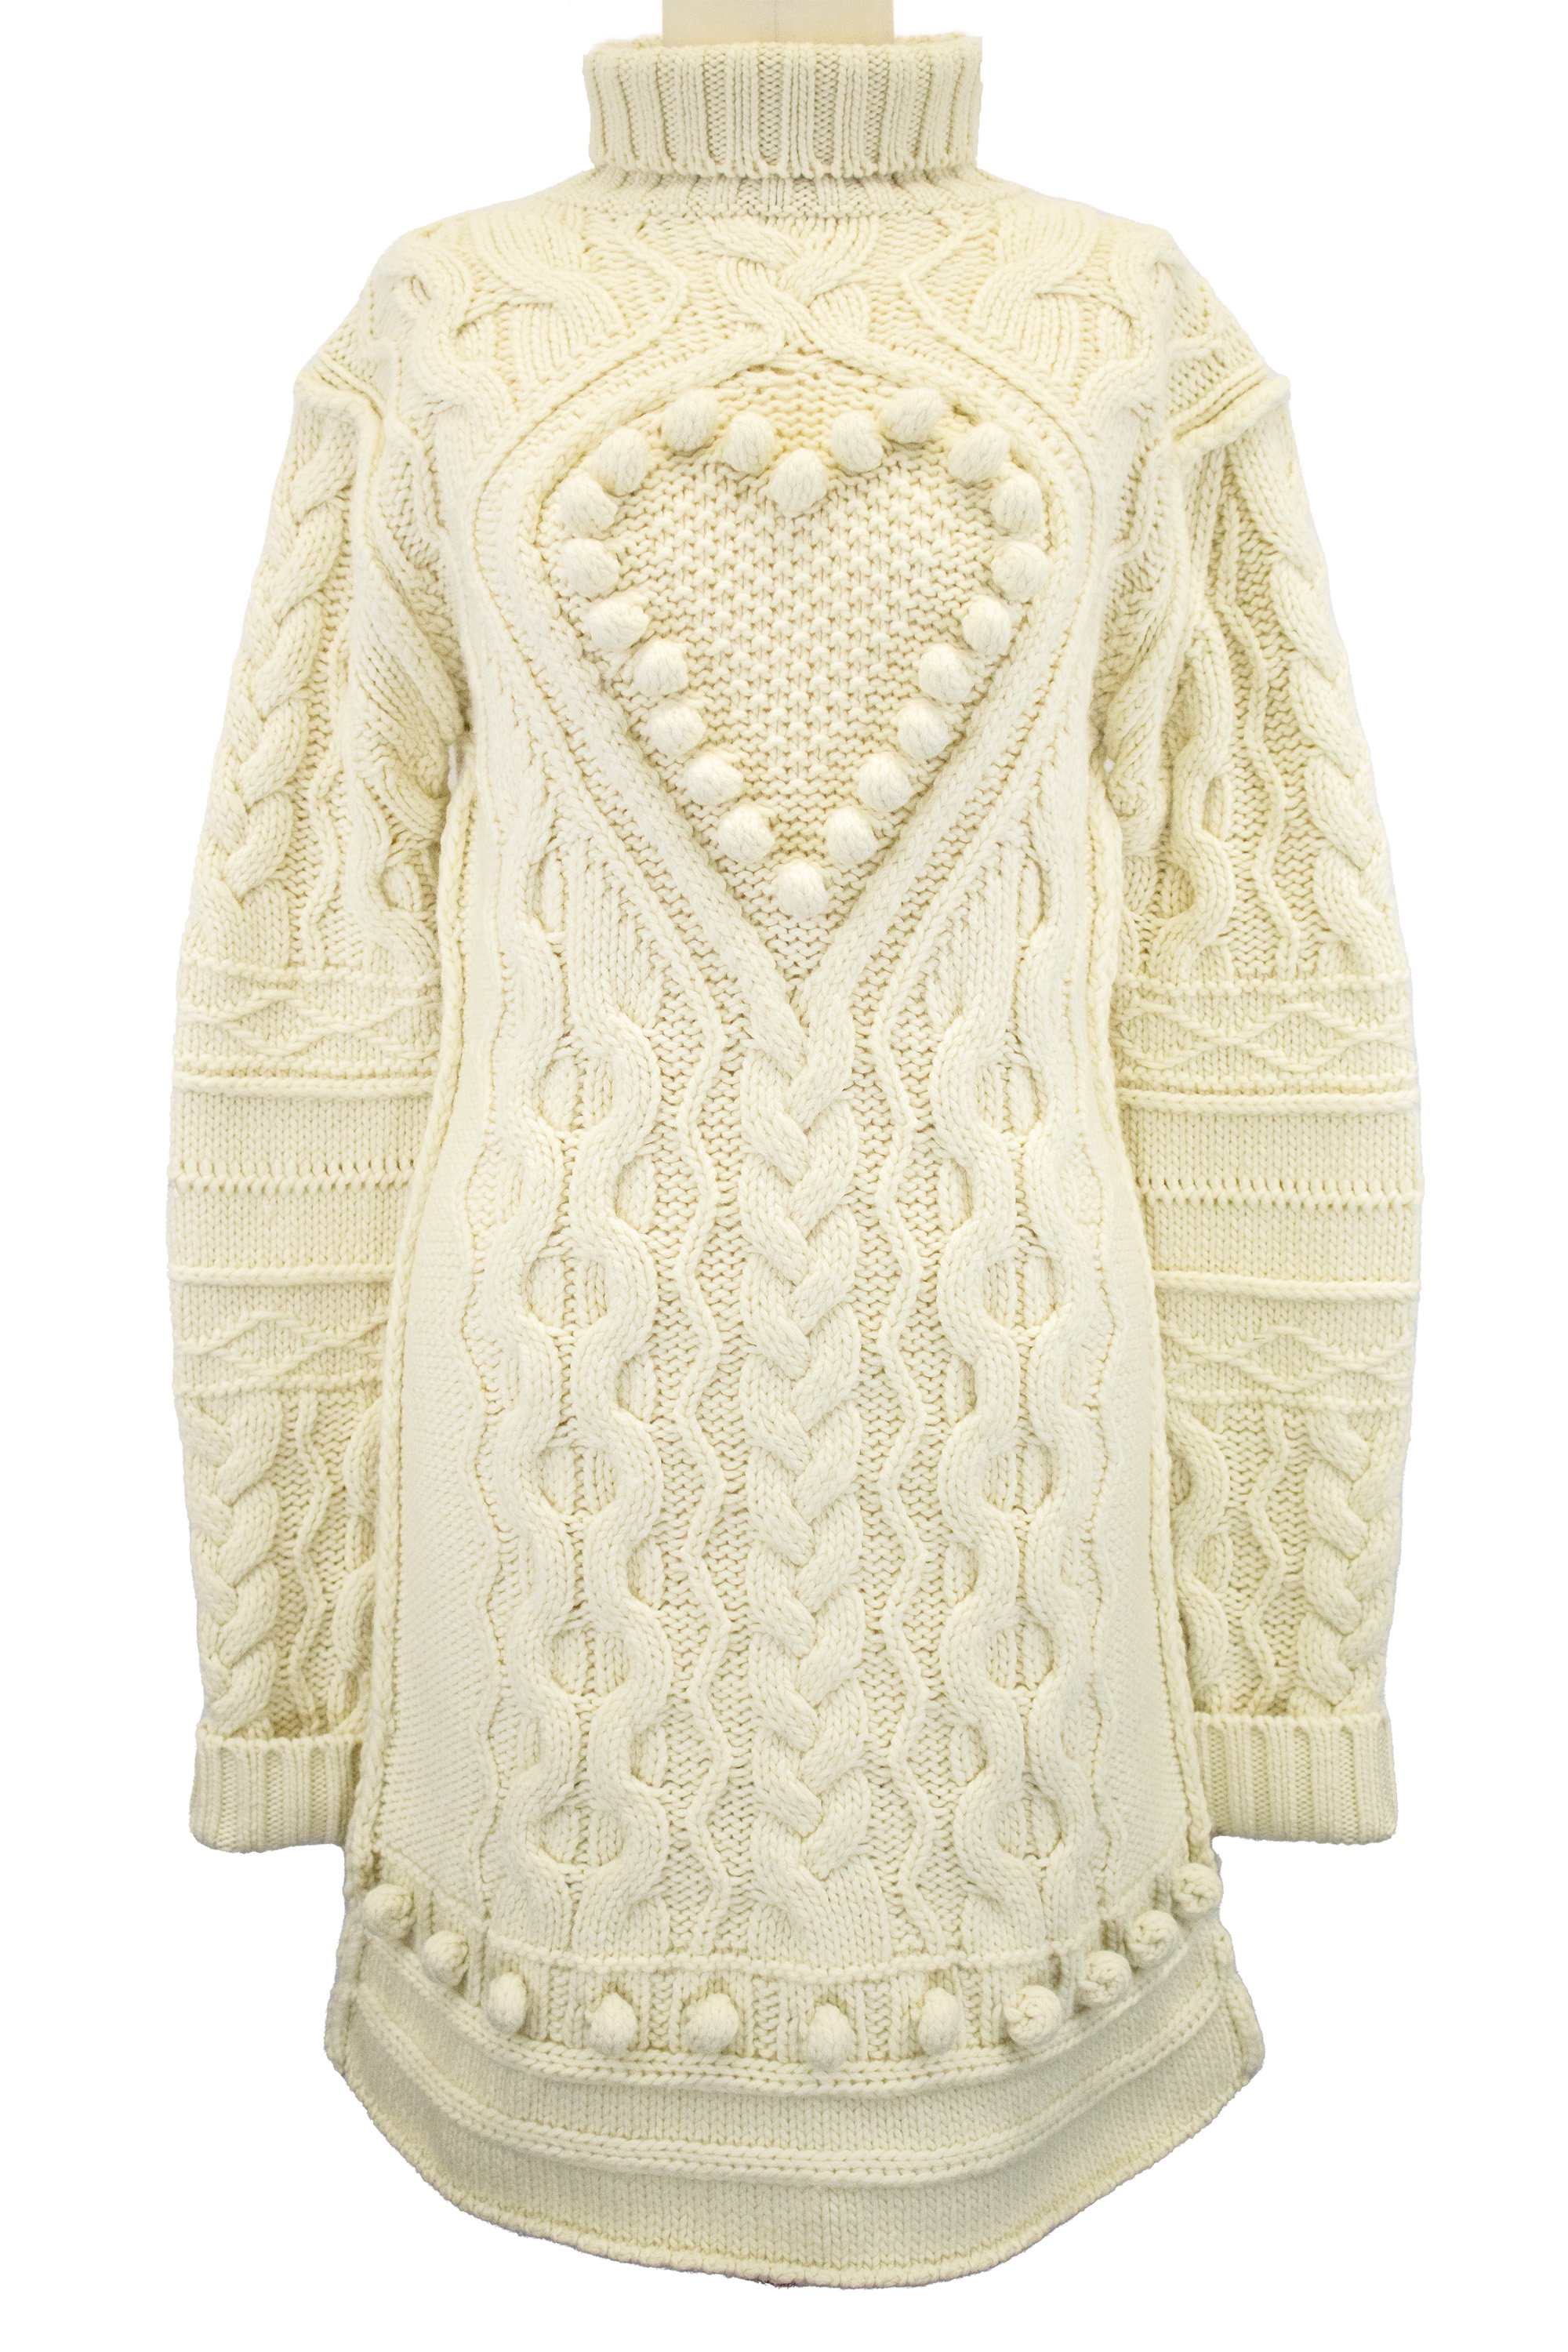 <img class='new_mark_img1' src='https://img.shop-pro.jp/img/new/icons8.gif' style='border:none;display:inline;margin:0px;padding:0px;width:auto;' />SPORT MAX Turtle neck knit dress